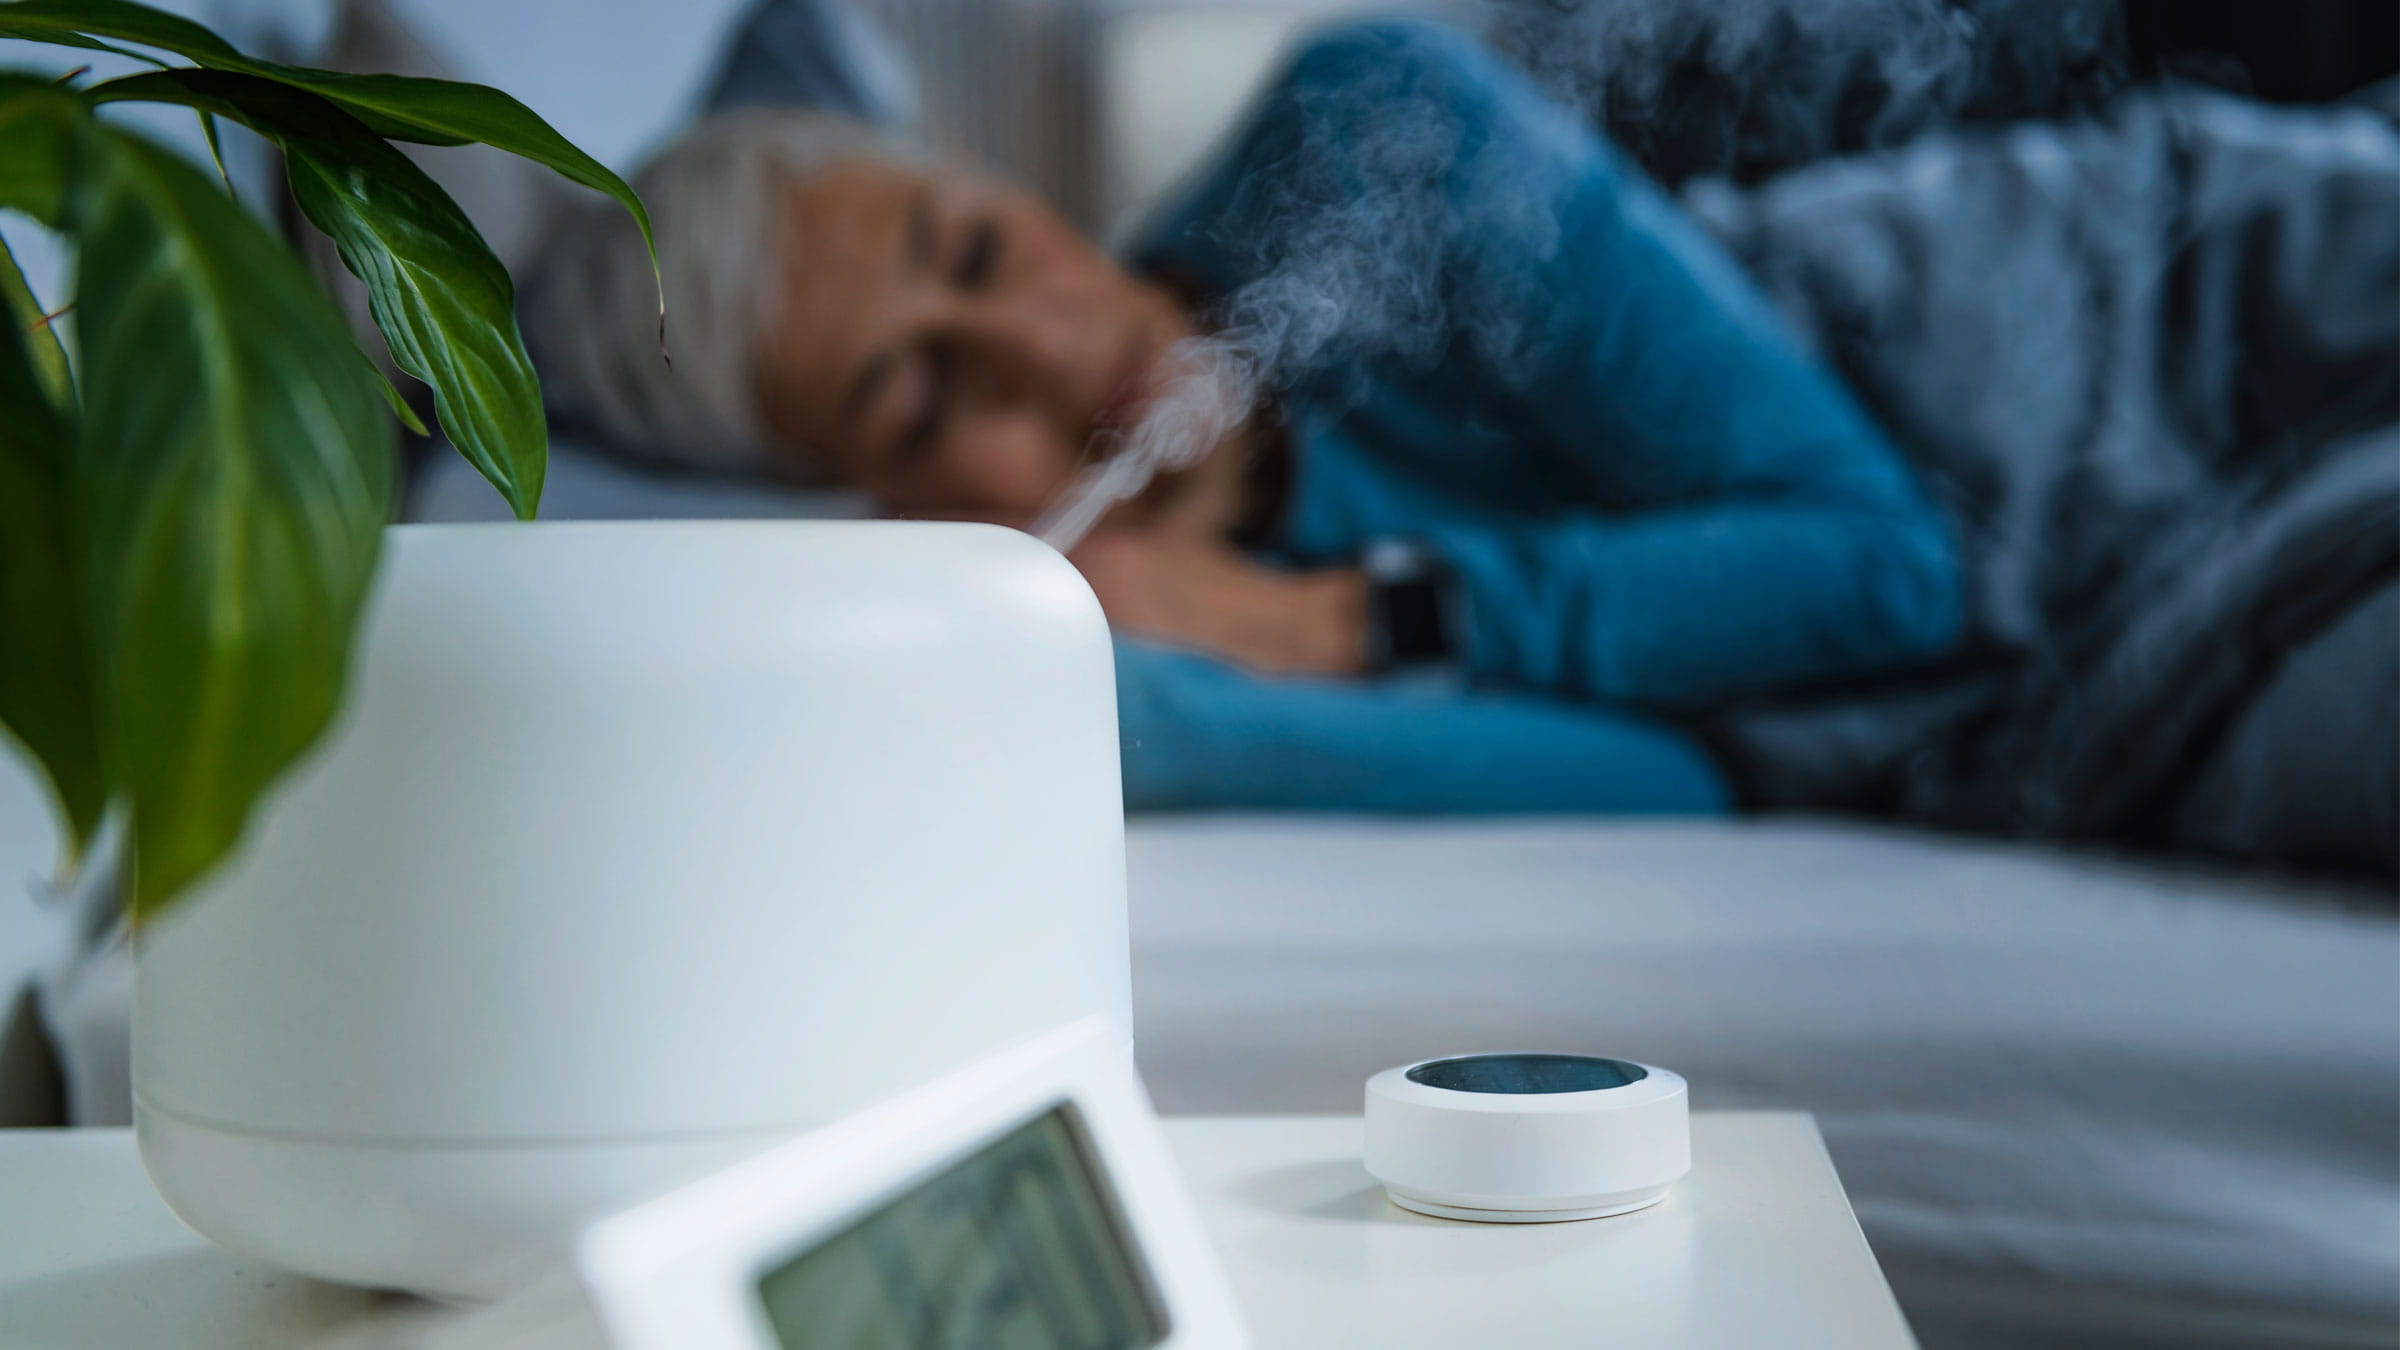 A woman appears to be sleeping in bed while a humidifier emits moisture into the air in the foreground.